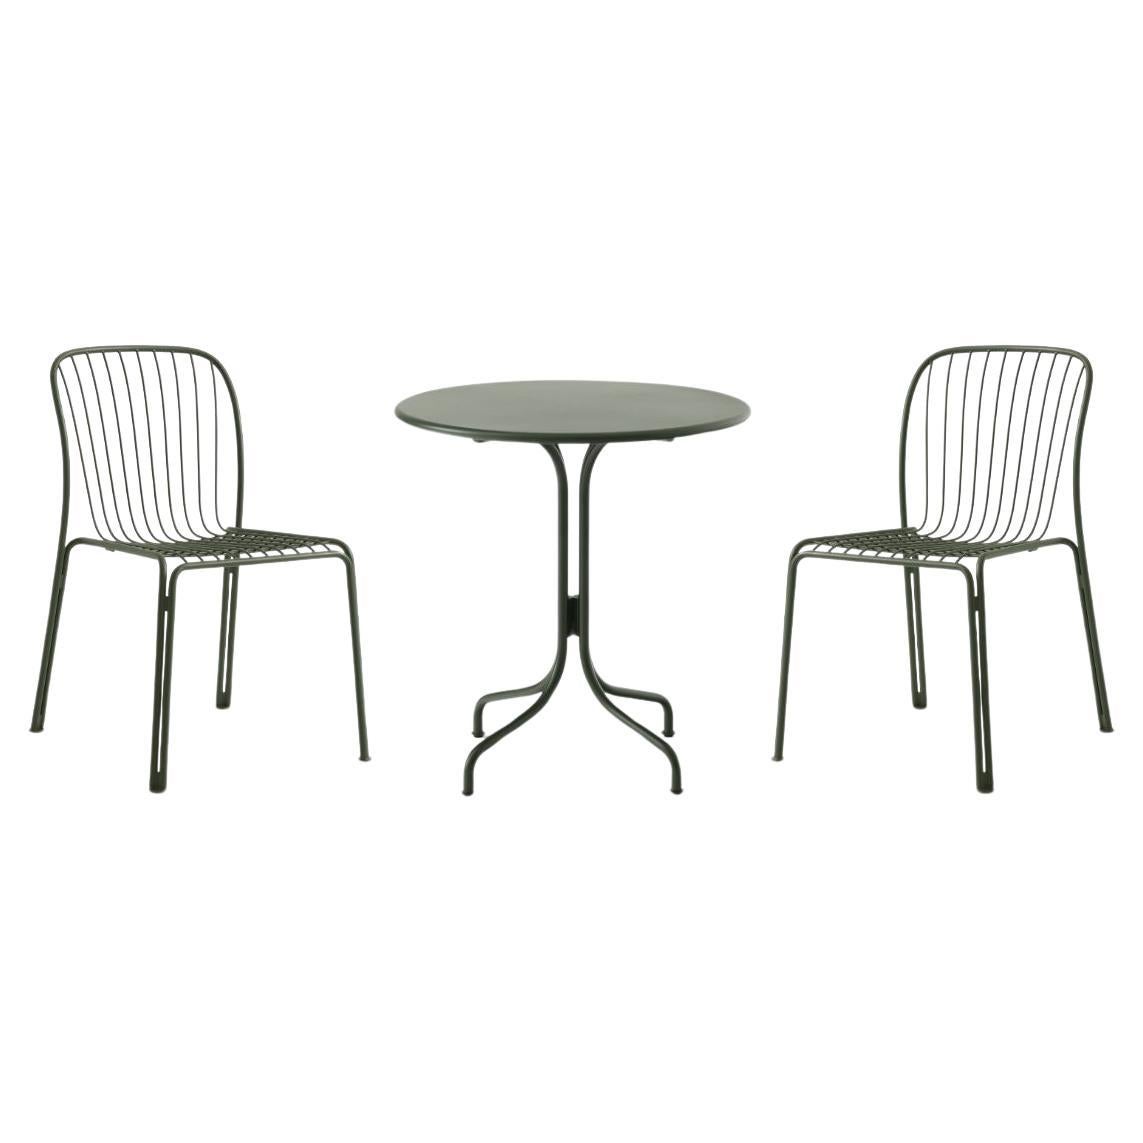 Set of Thorvald Outdoor Side Chairs/Table-BronzeGreen-by Space Copenhagen for &T